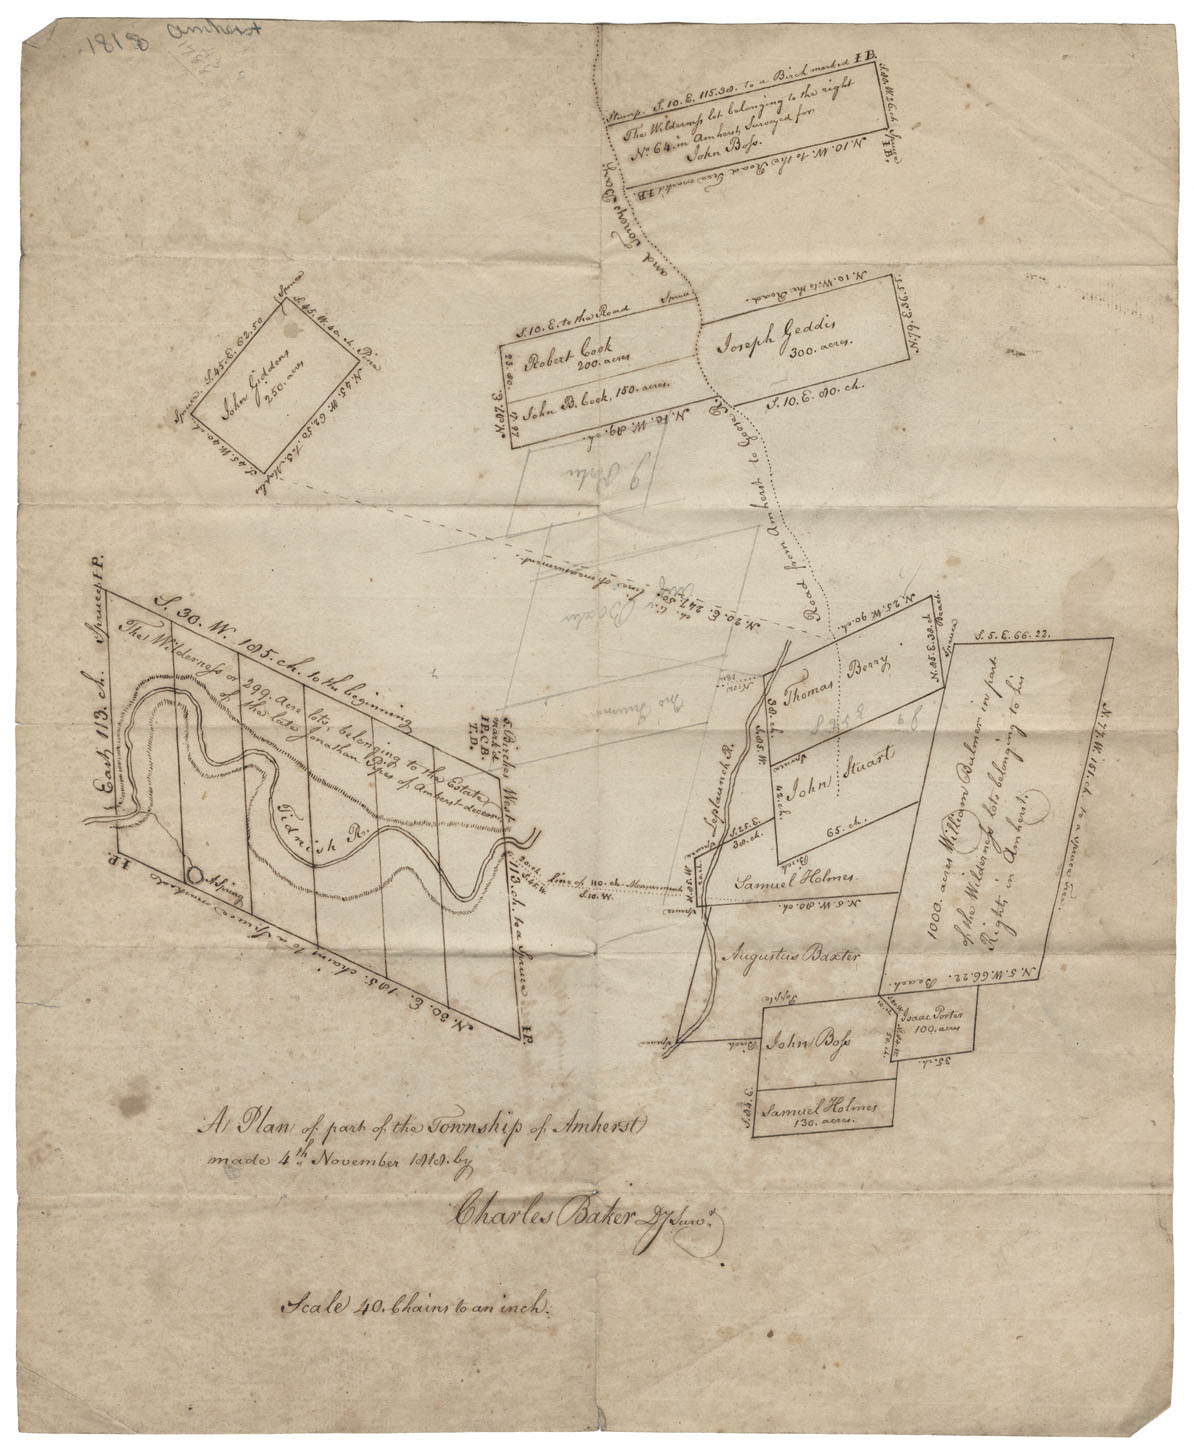 A plan of part of the Township of Amherst Maps: Amherst: 1818